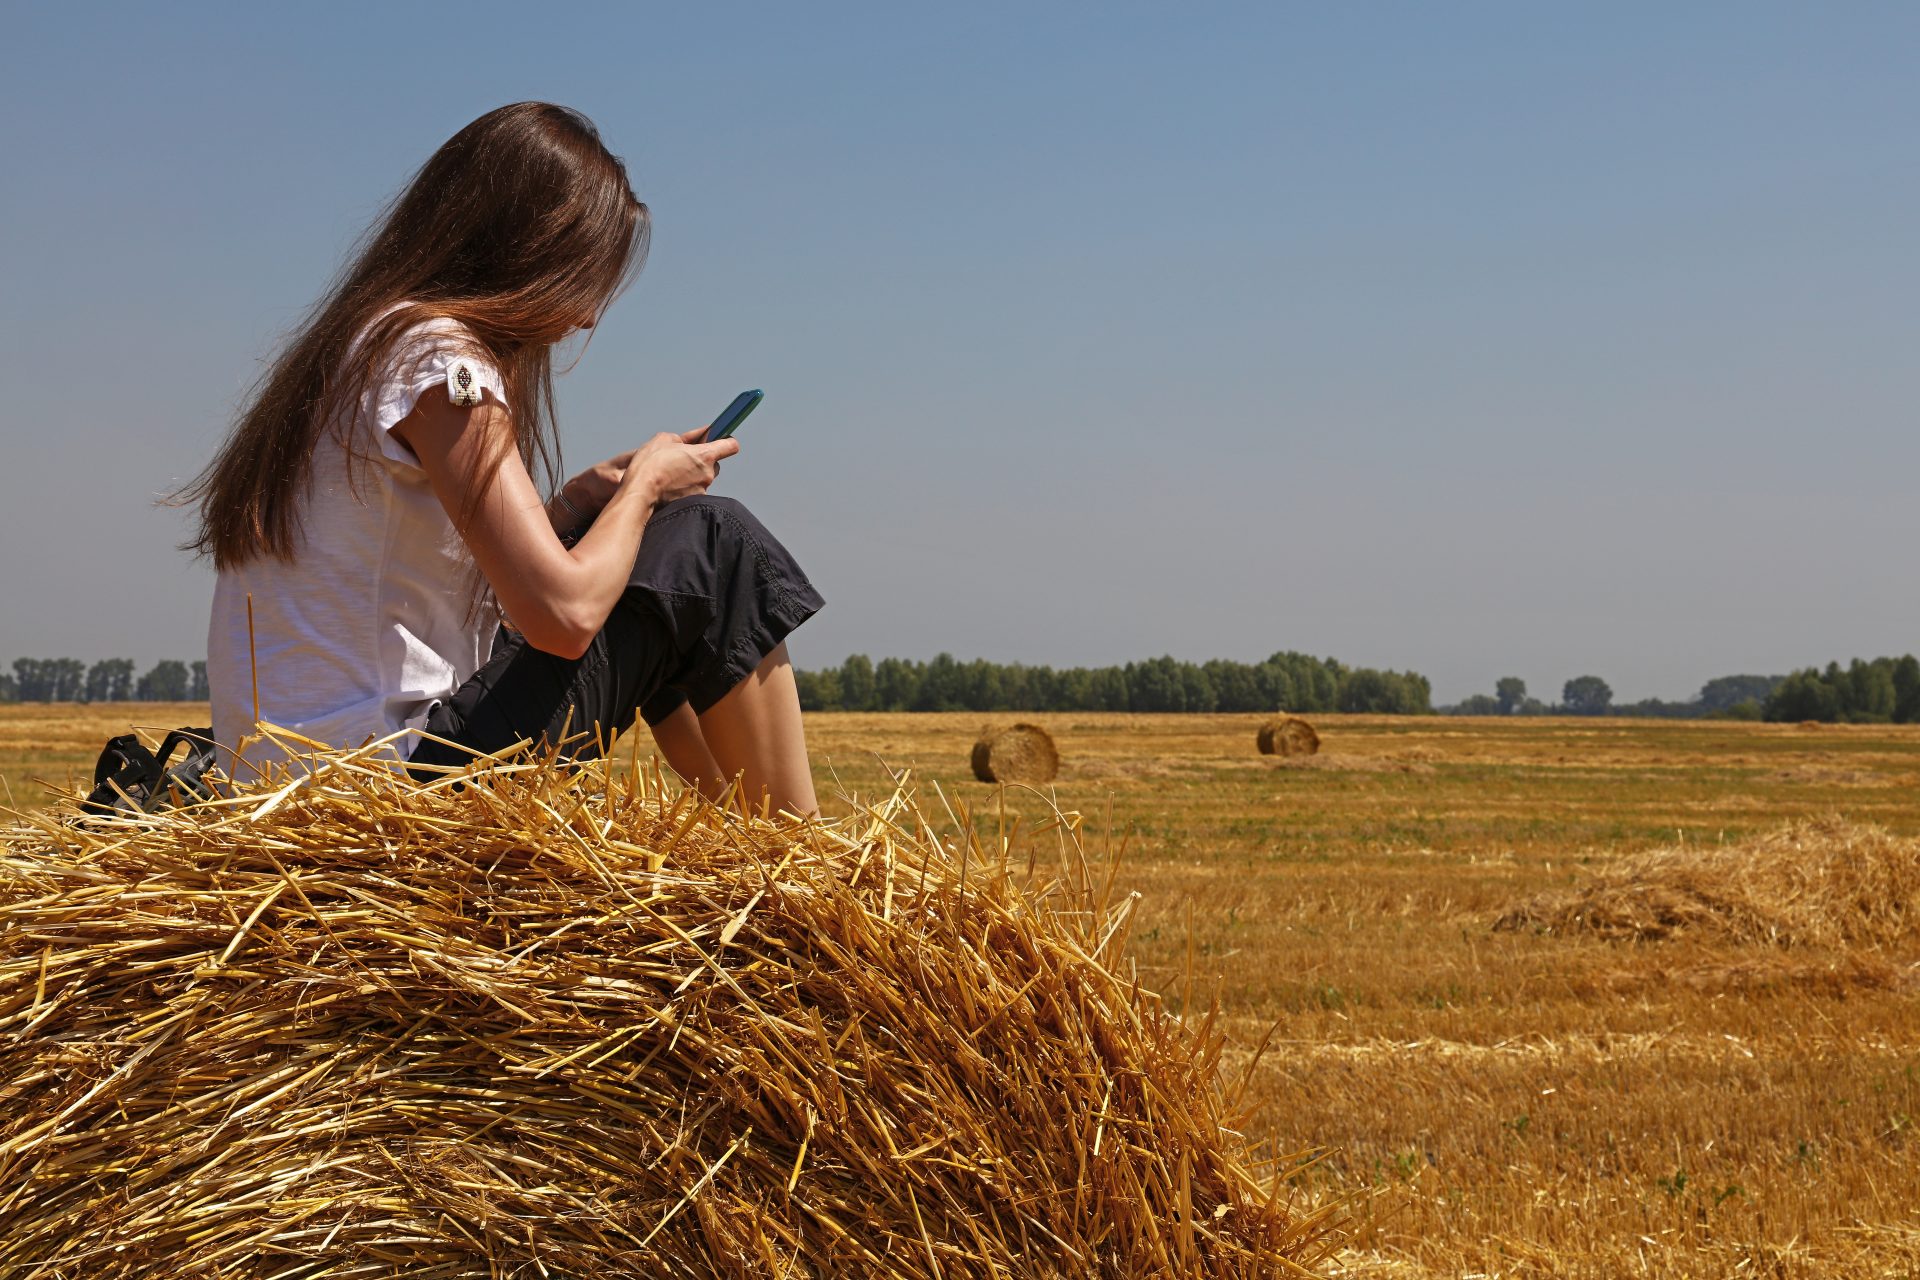 Young woman sitting on straw bale looking at smartphone